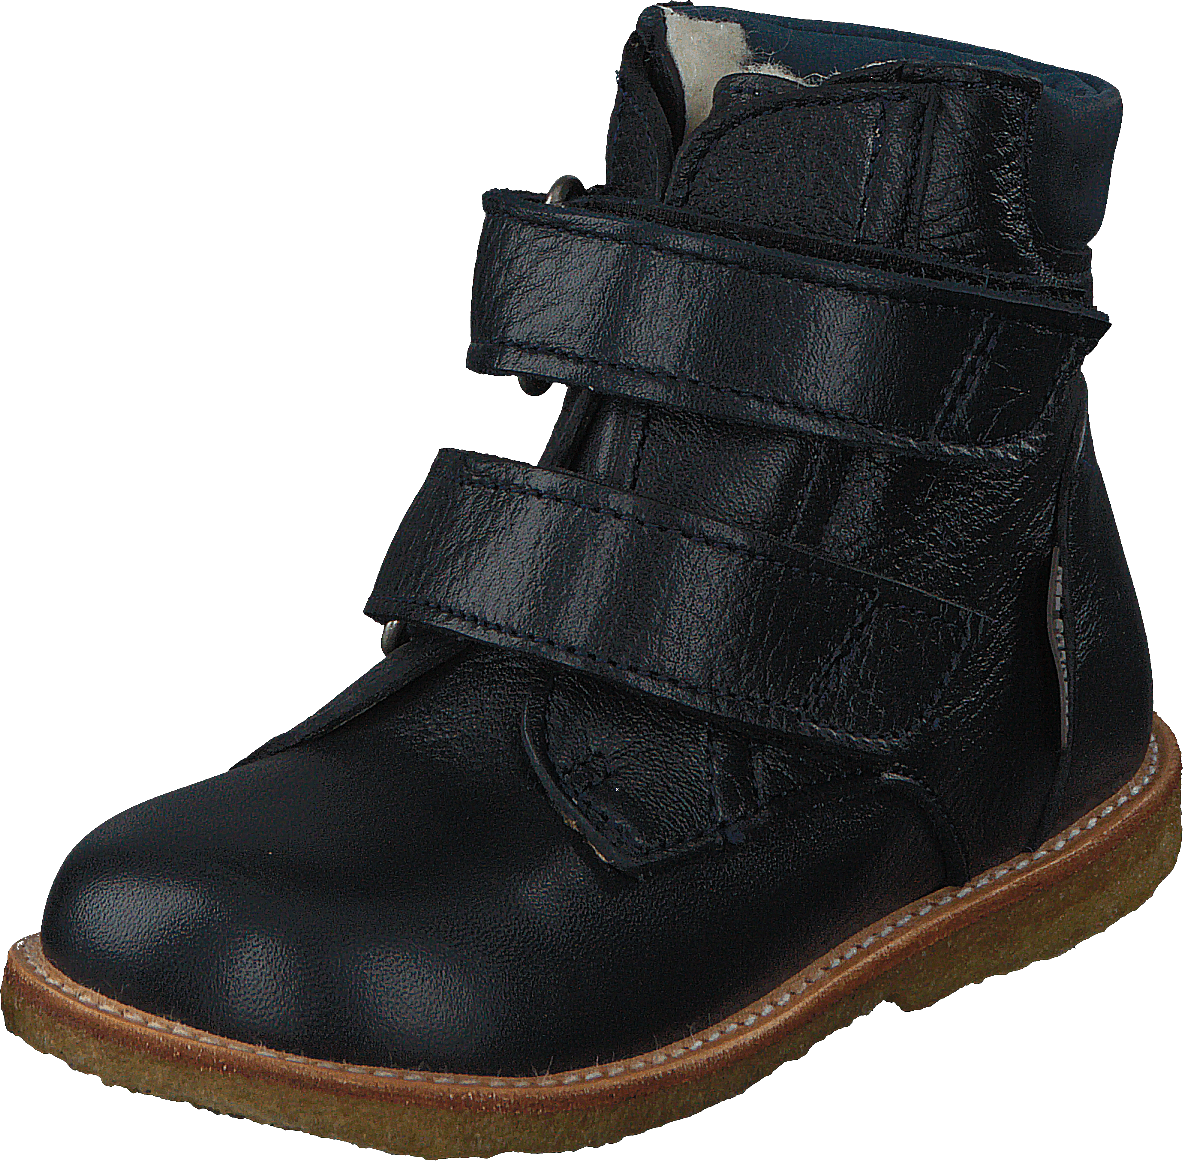 First Tex boot with velcro Navy/Blue